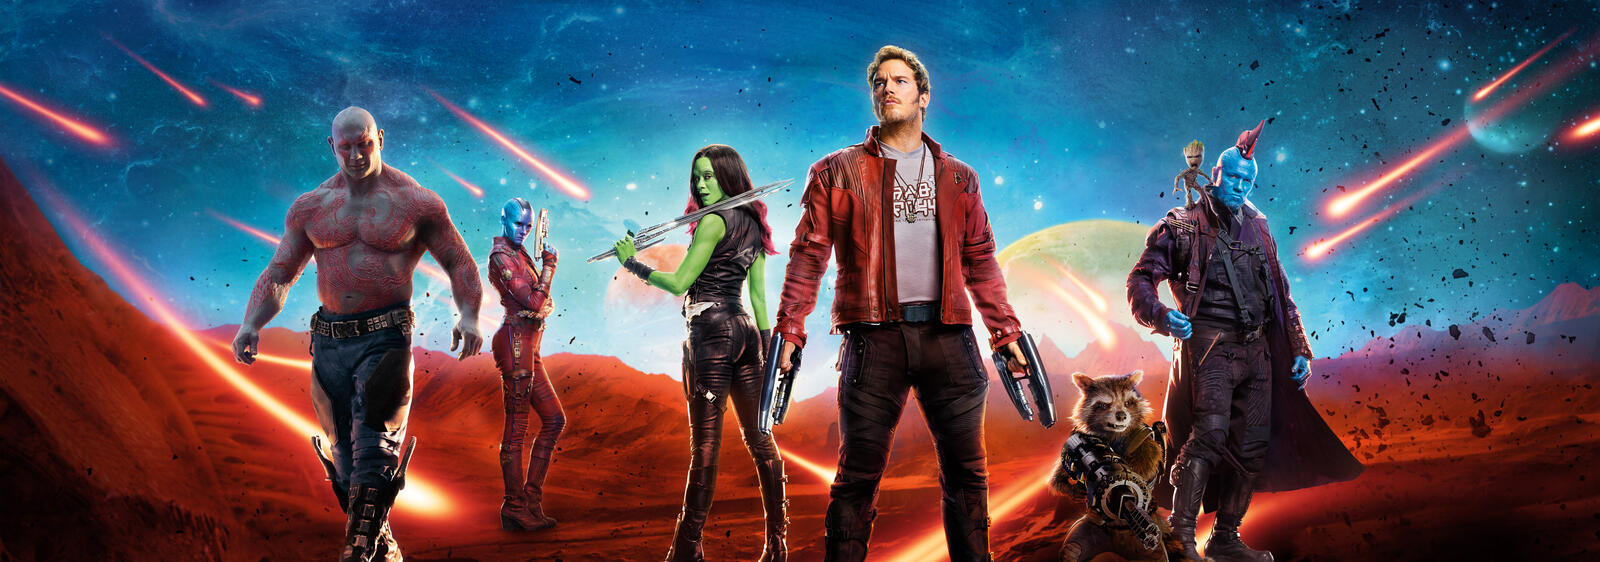 Wallpapers Guardians of the Galaxy Part 2 2017 banner fantasy on the desktop